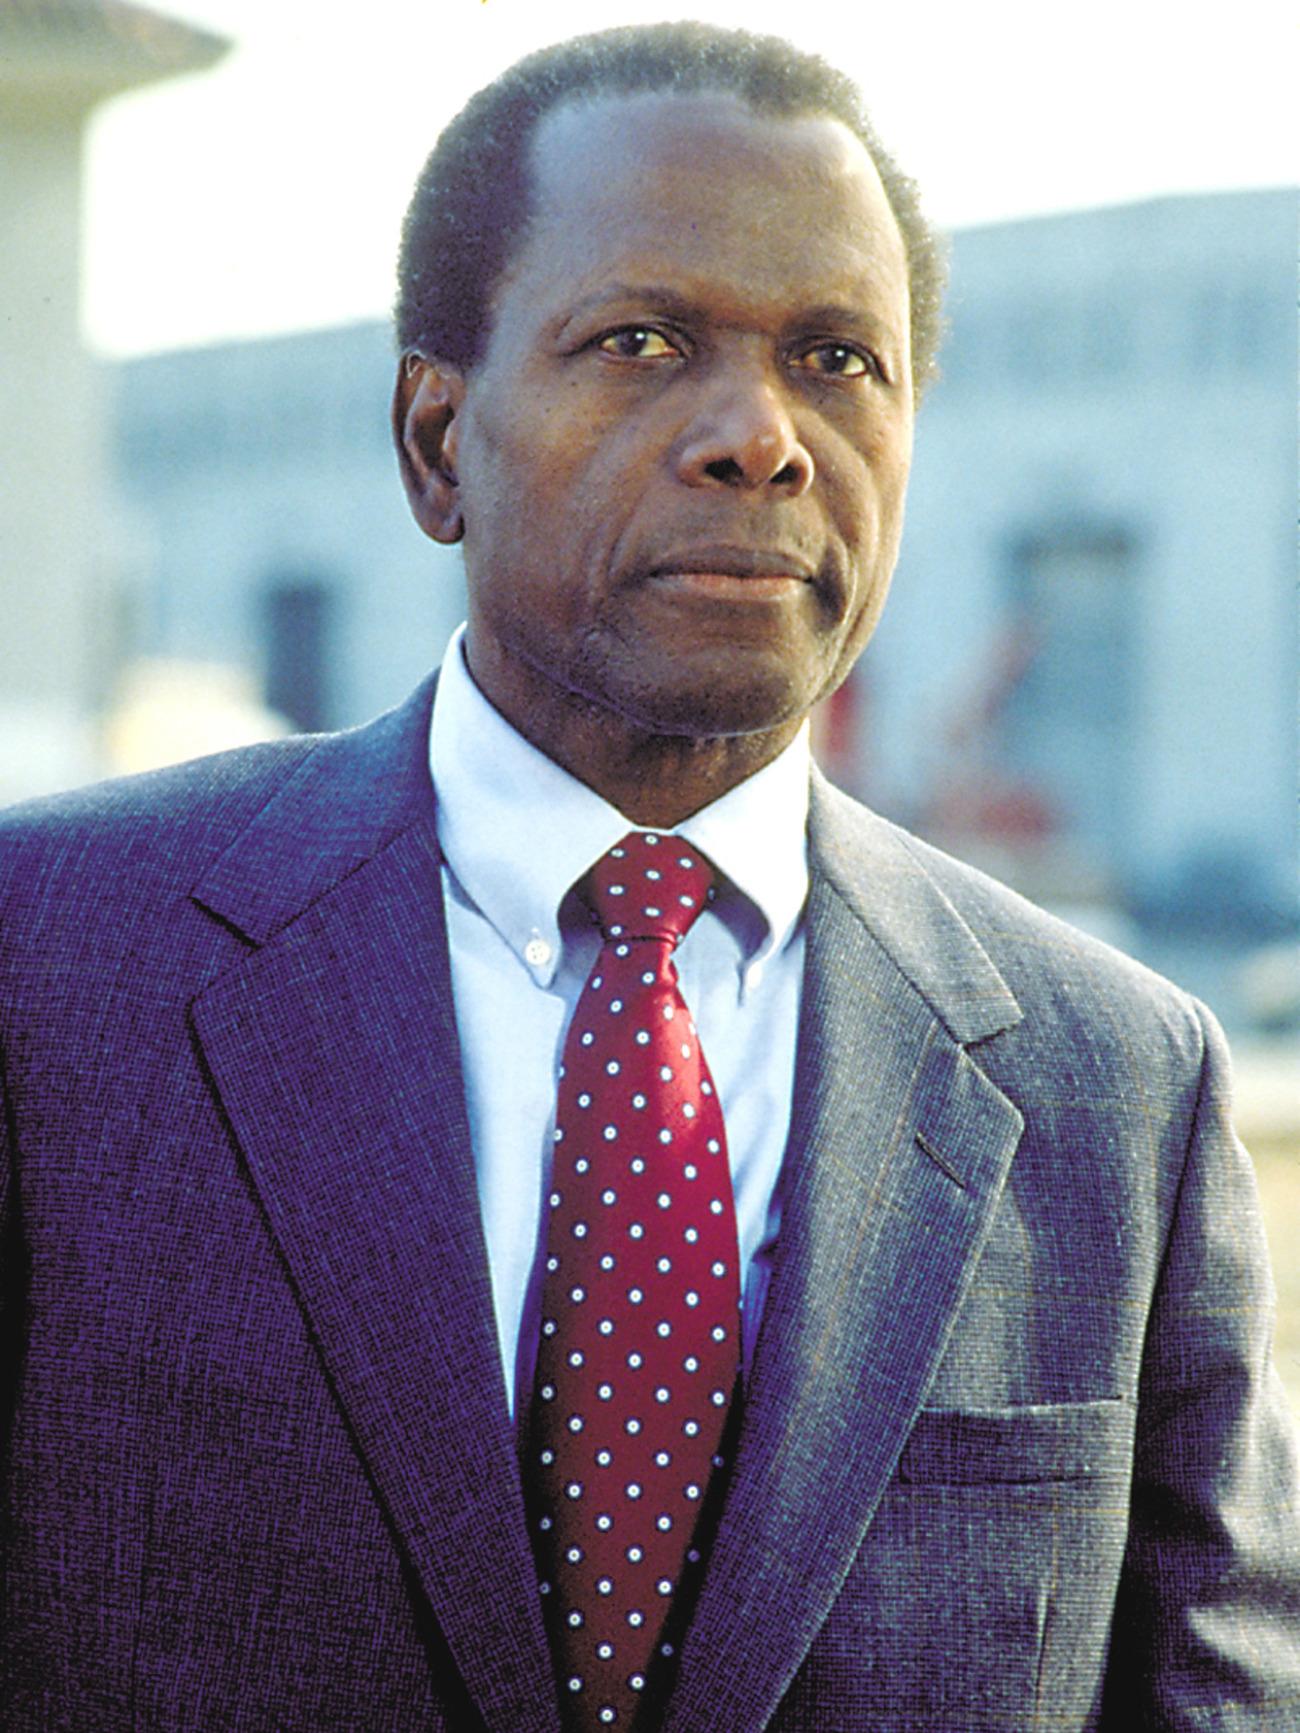 Ktchenor image Sidney Poitier HD wallpaper and background photo